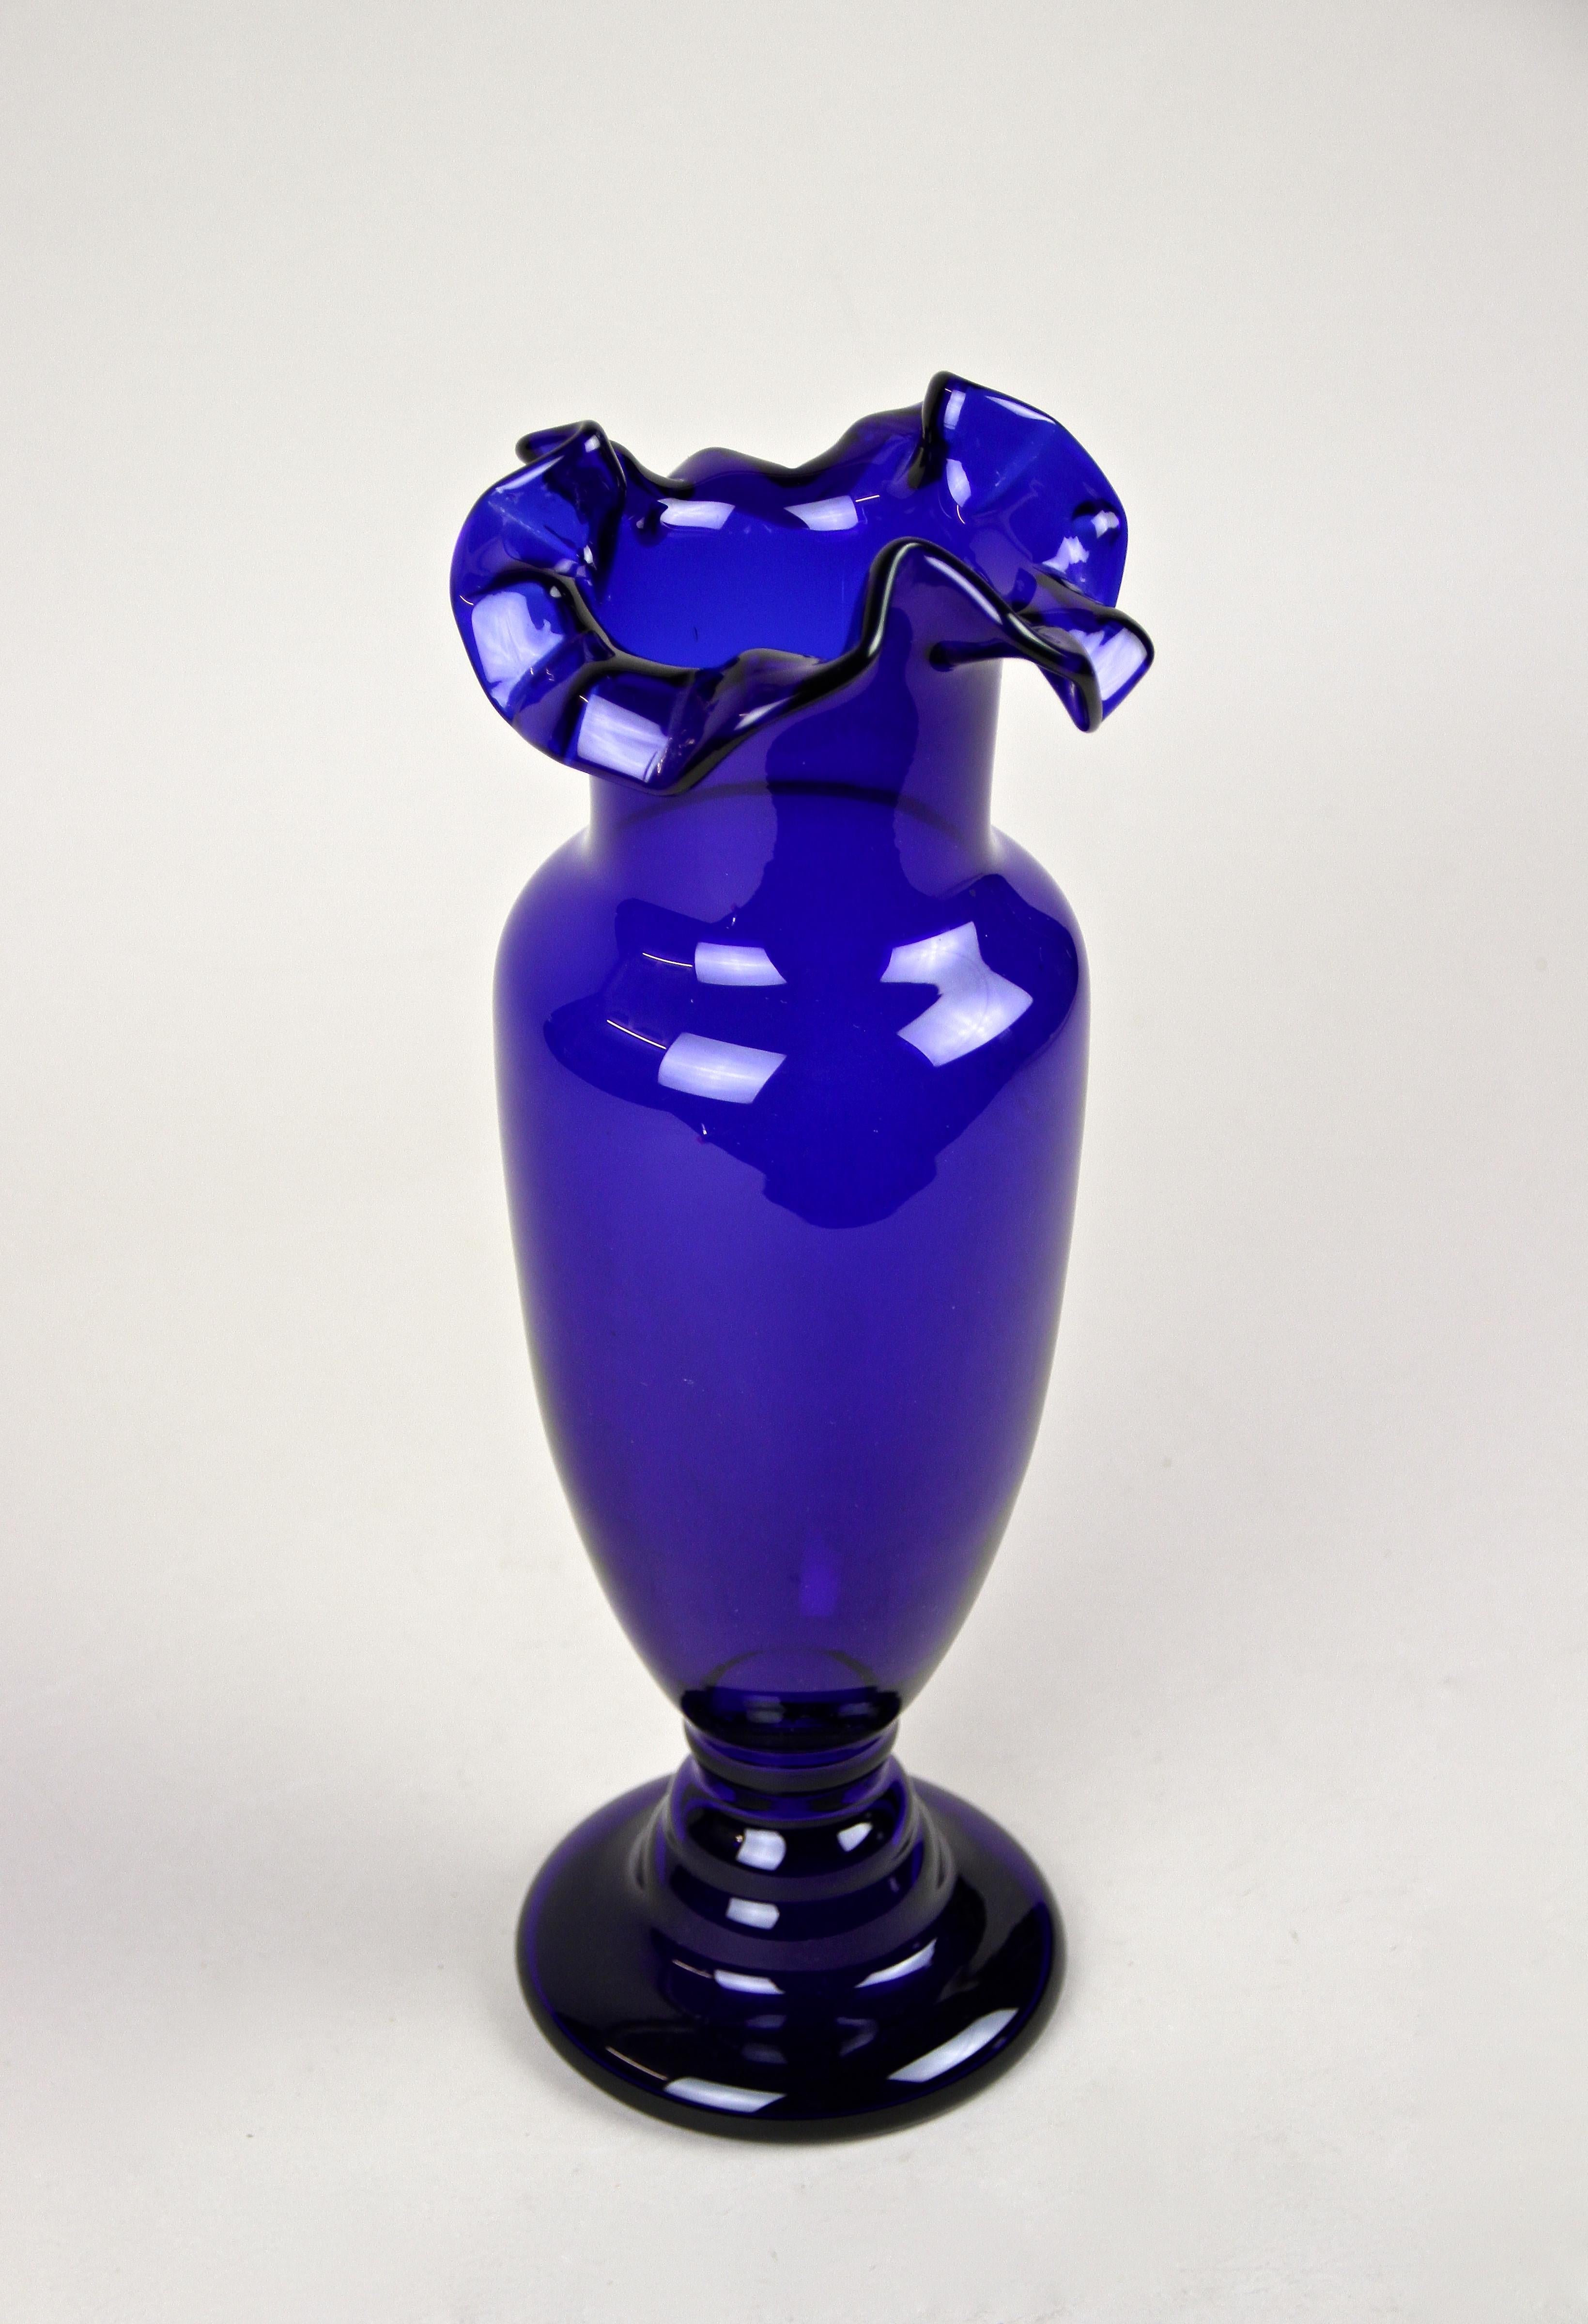 Mesmerizing early 20th century blue glass vase from the Art Nouveau period in Austria. The Beautifully designed around 1900 this glass vase shows a bulbous mouthblown dark blue body and captivates with its nicely bent up frilly glass neck, edged by